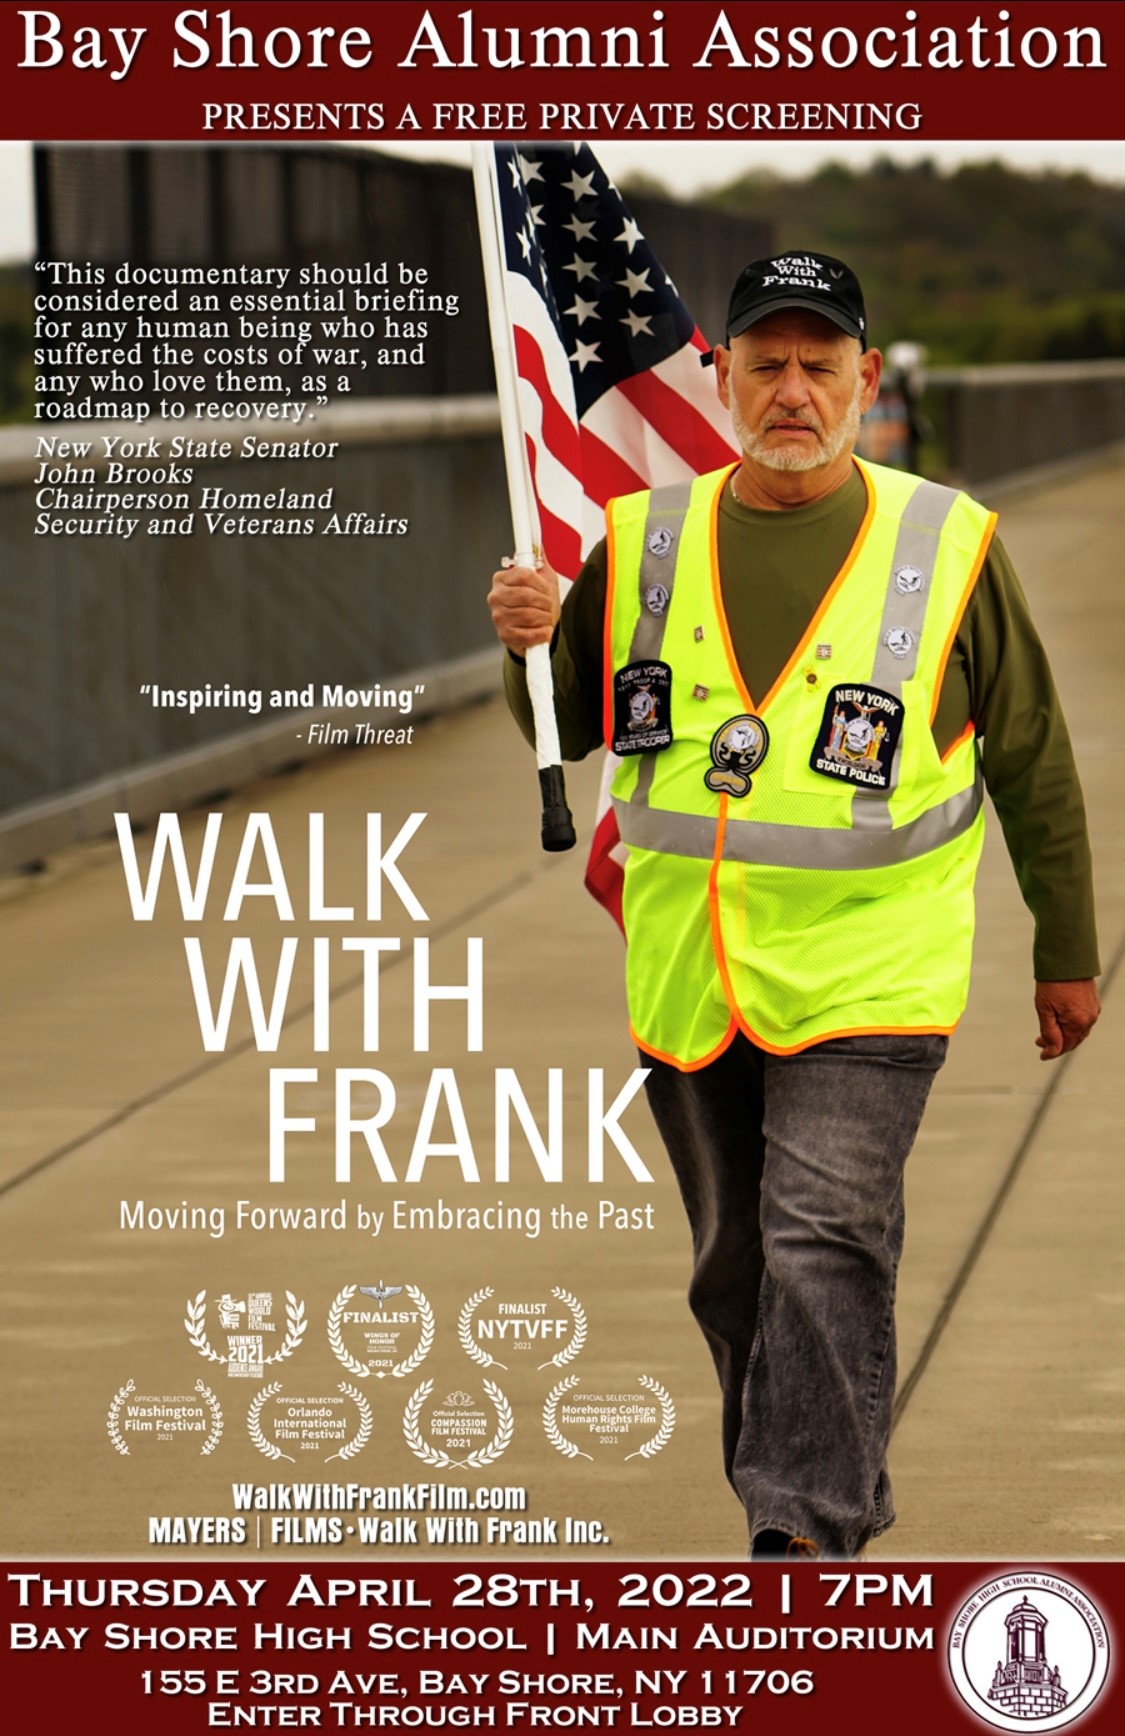 Flyer for Walk With Frank Free Private Screening at Bay Shore HS on Thursday, 4/28/22 at 7pm